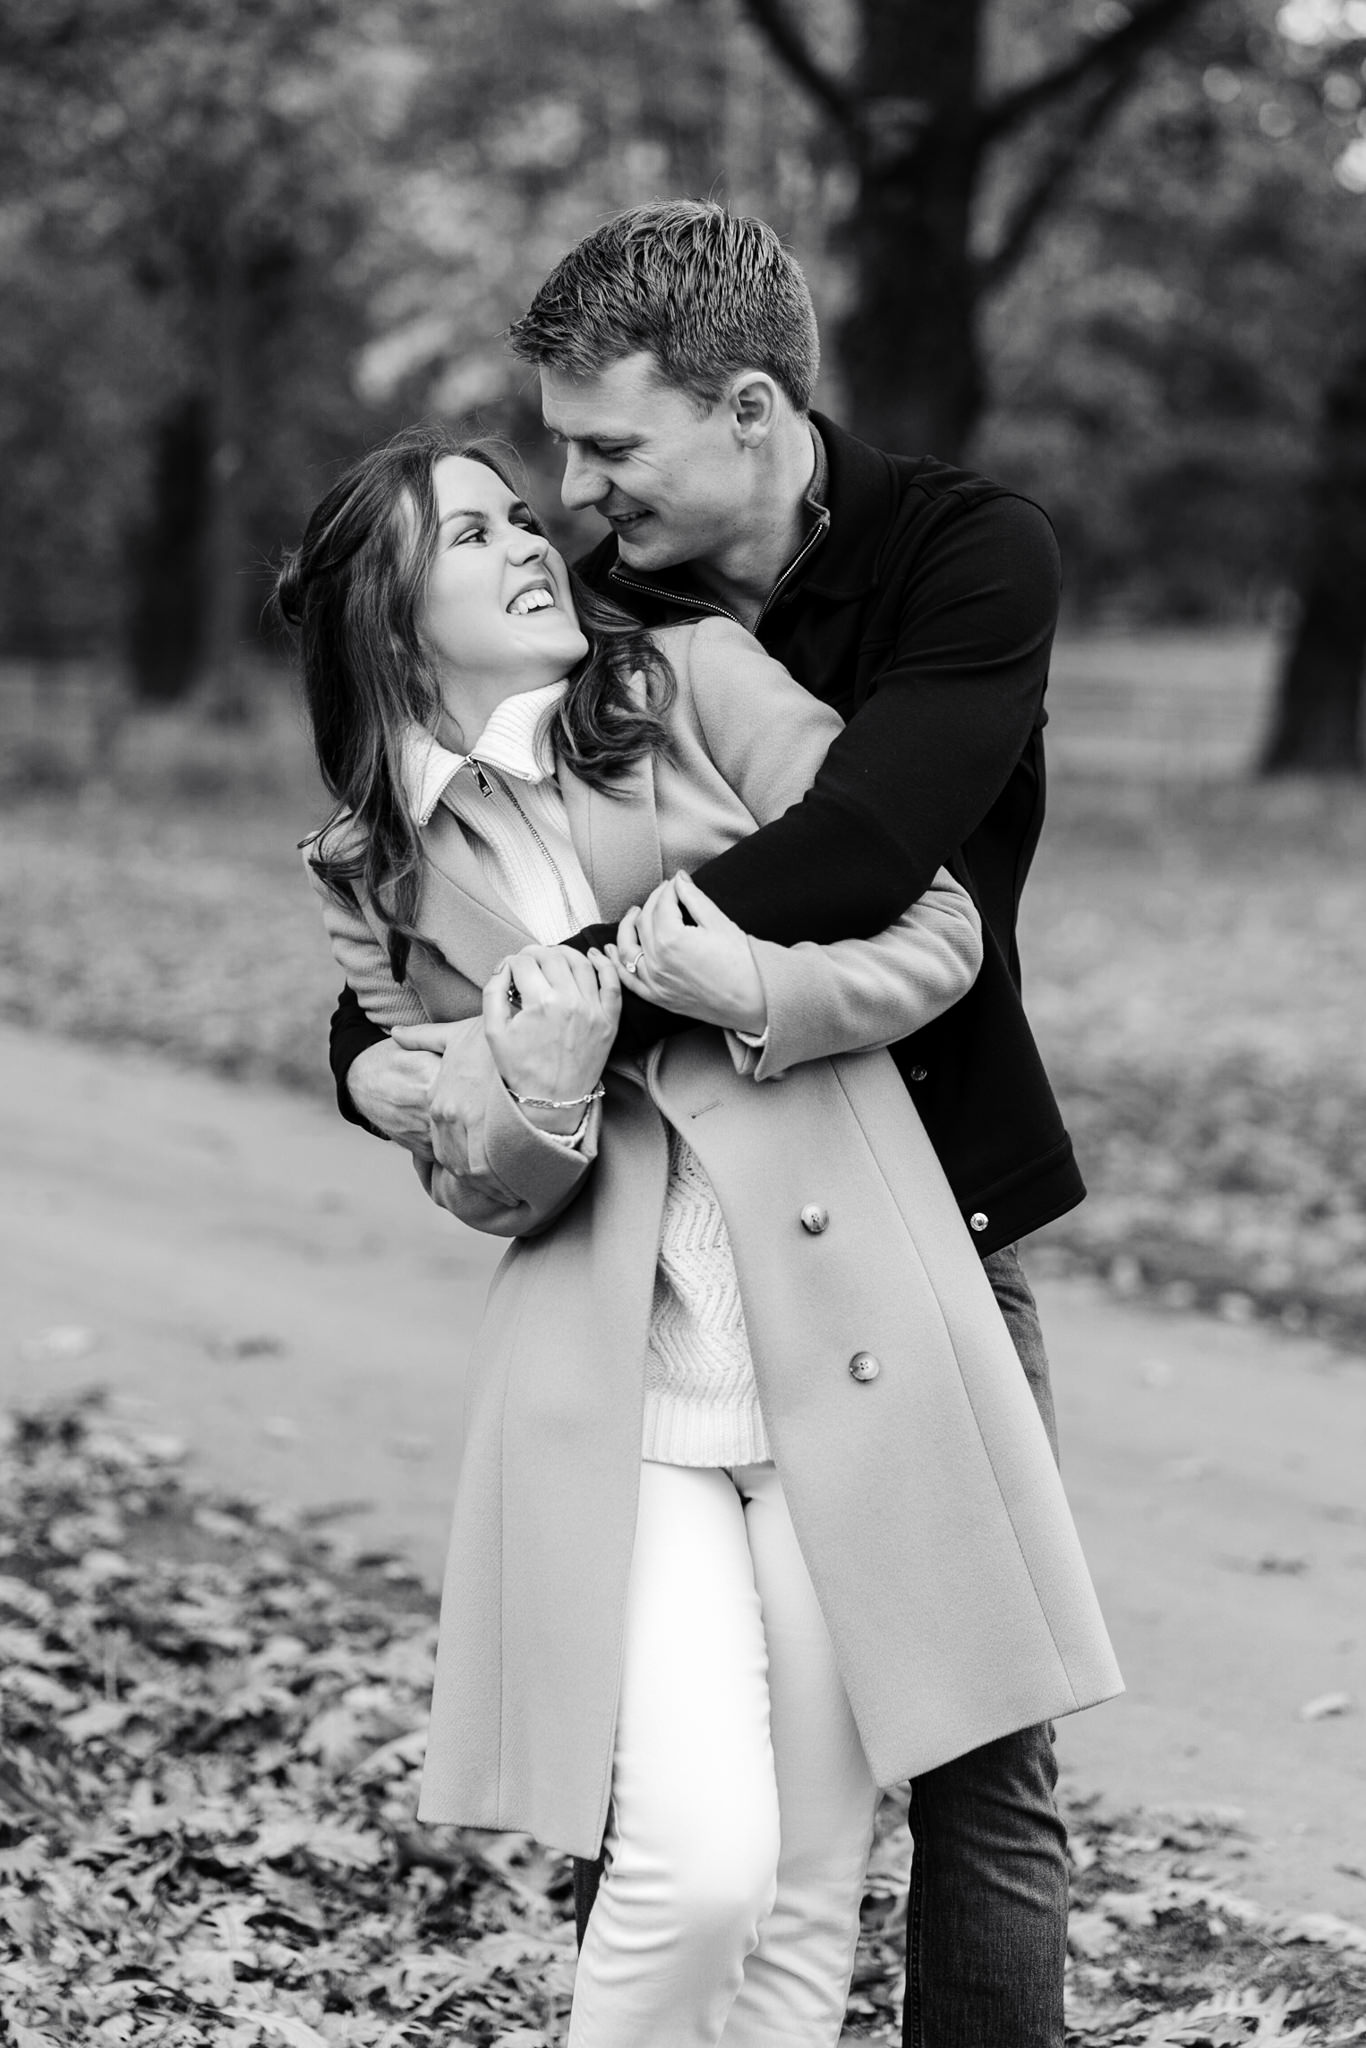 black and white portrait of a couple embracing with leaves on the floor in the background